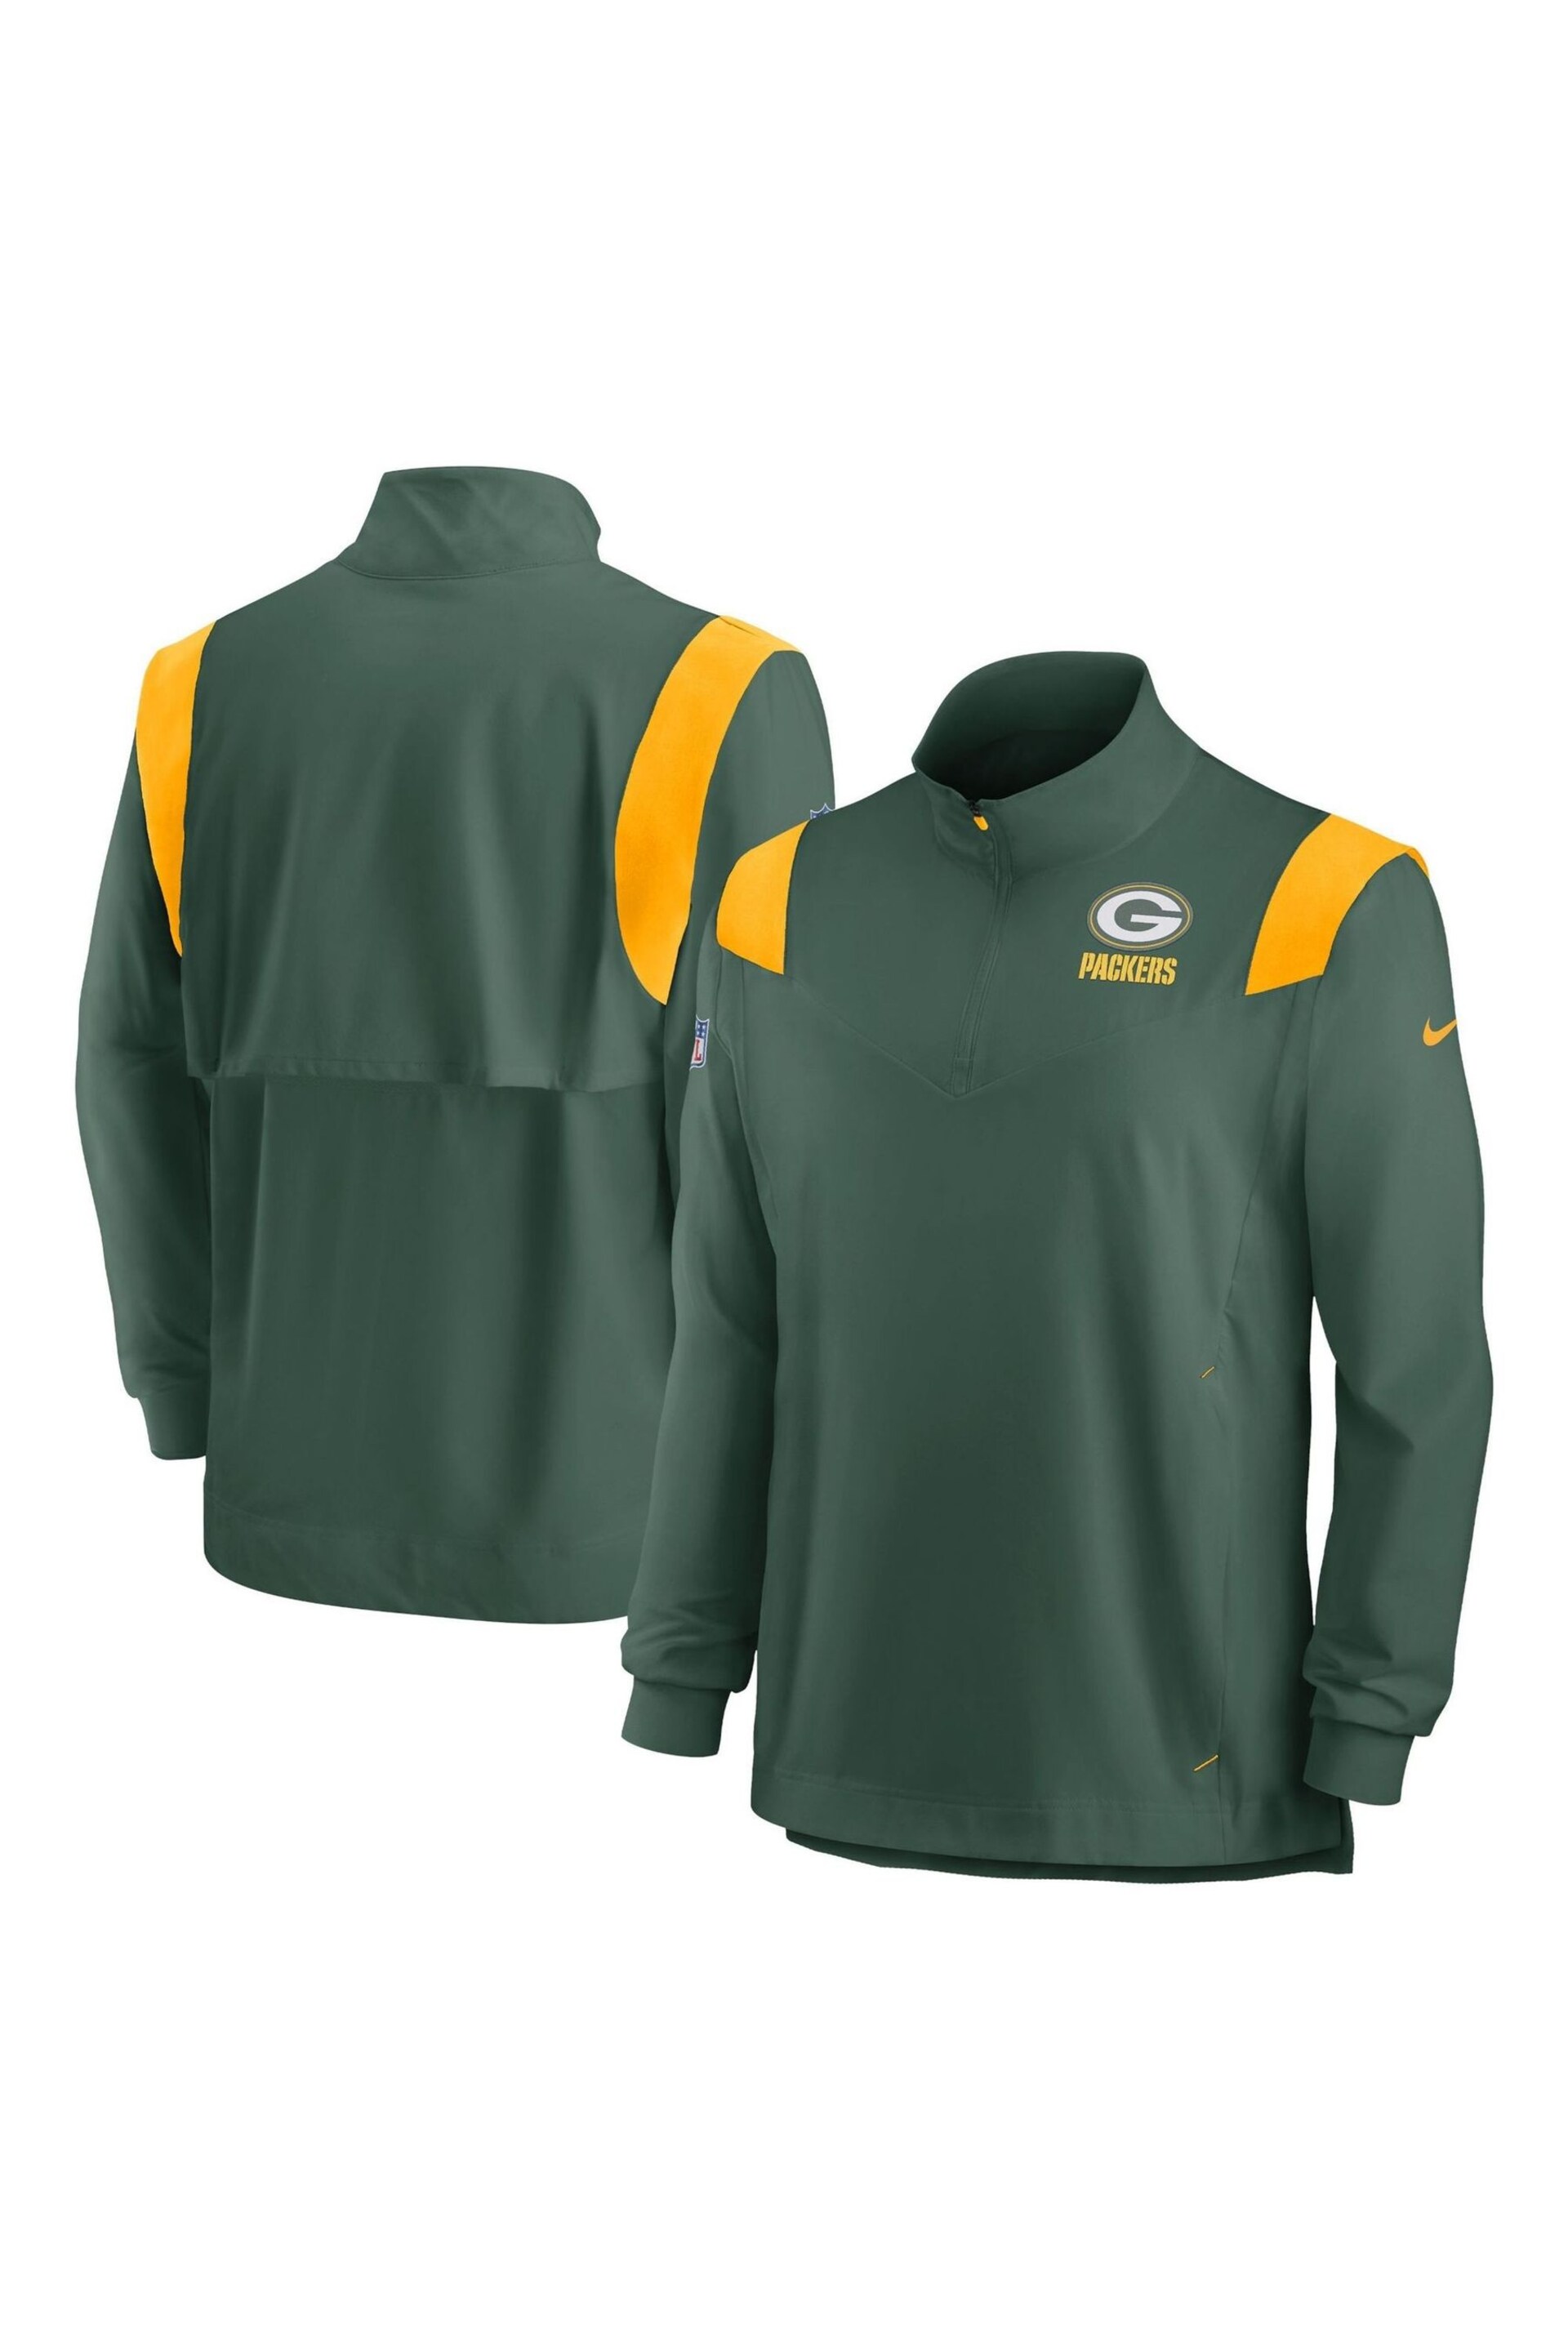 Nike Green NFL Fanatics Mens Bay Packers Repel Lightweight Coach Long Sleeve Sweat Top - Image 1 of 3